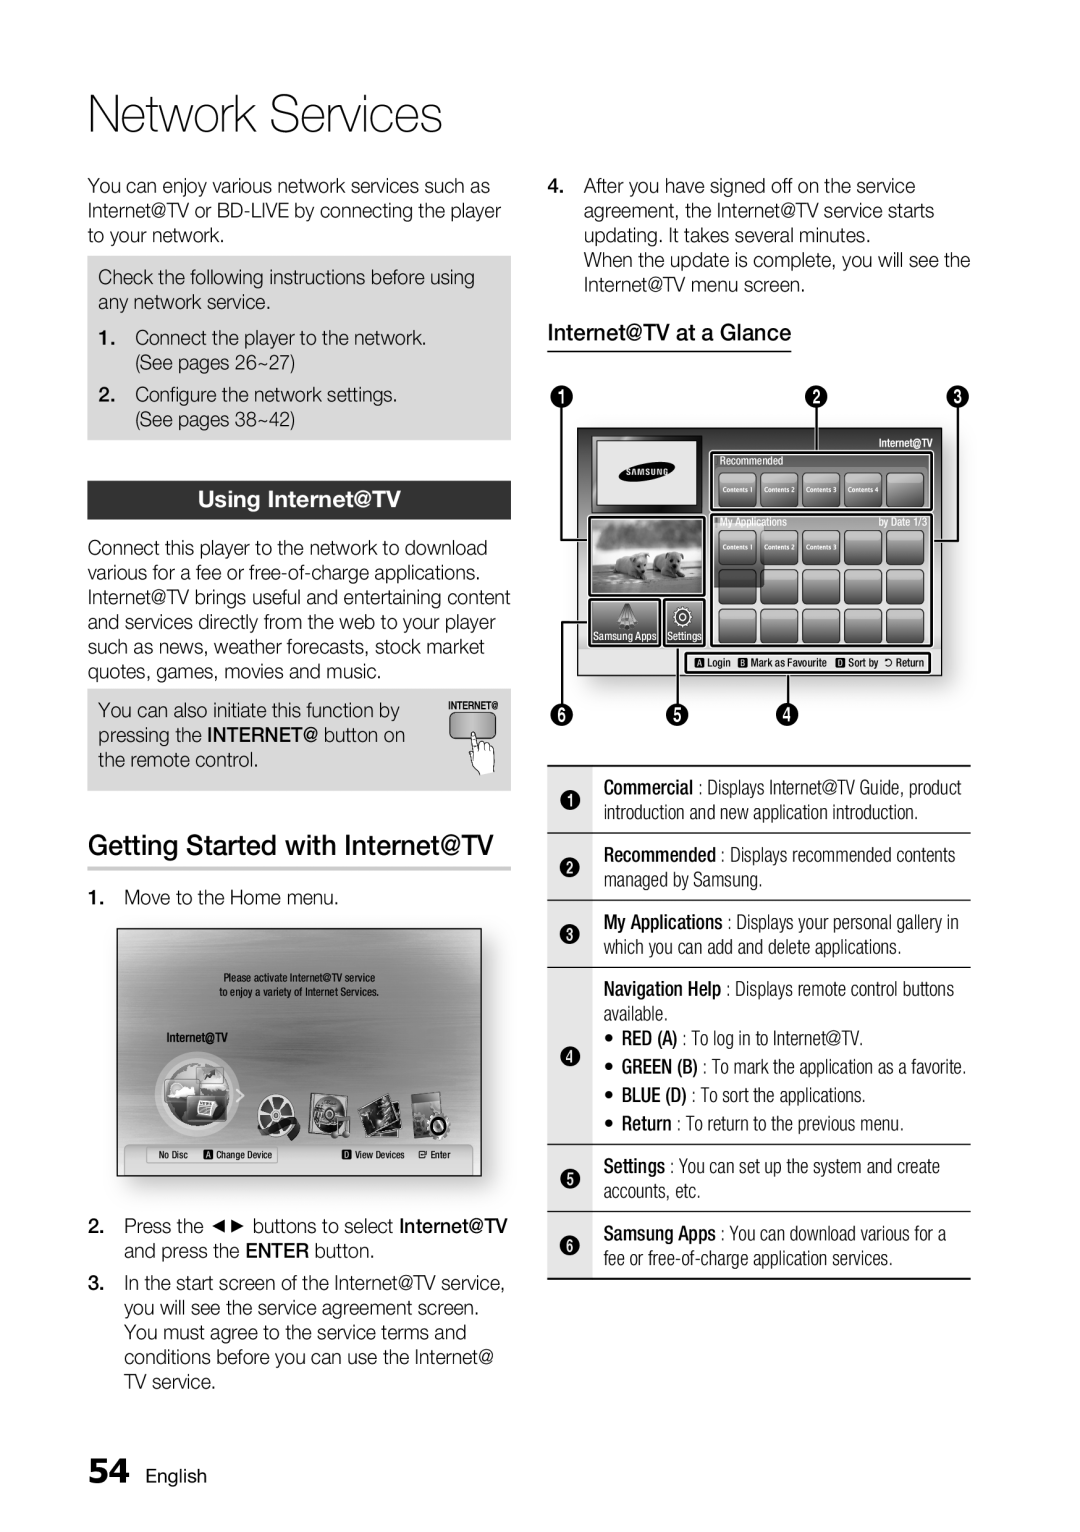 Samsung BD-C7500/XEE Internet@TV at a Glance, English, Recommended, My Applications, by Date 1/3, Samsung Apps, Settings 